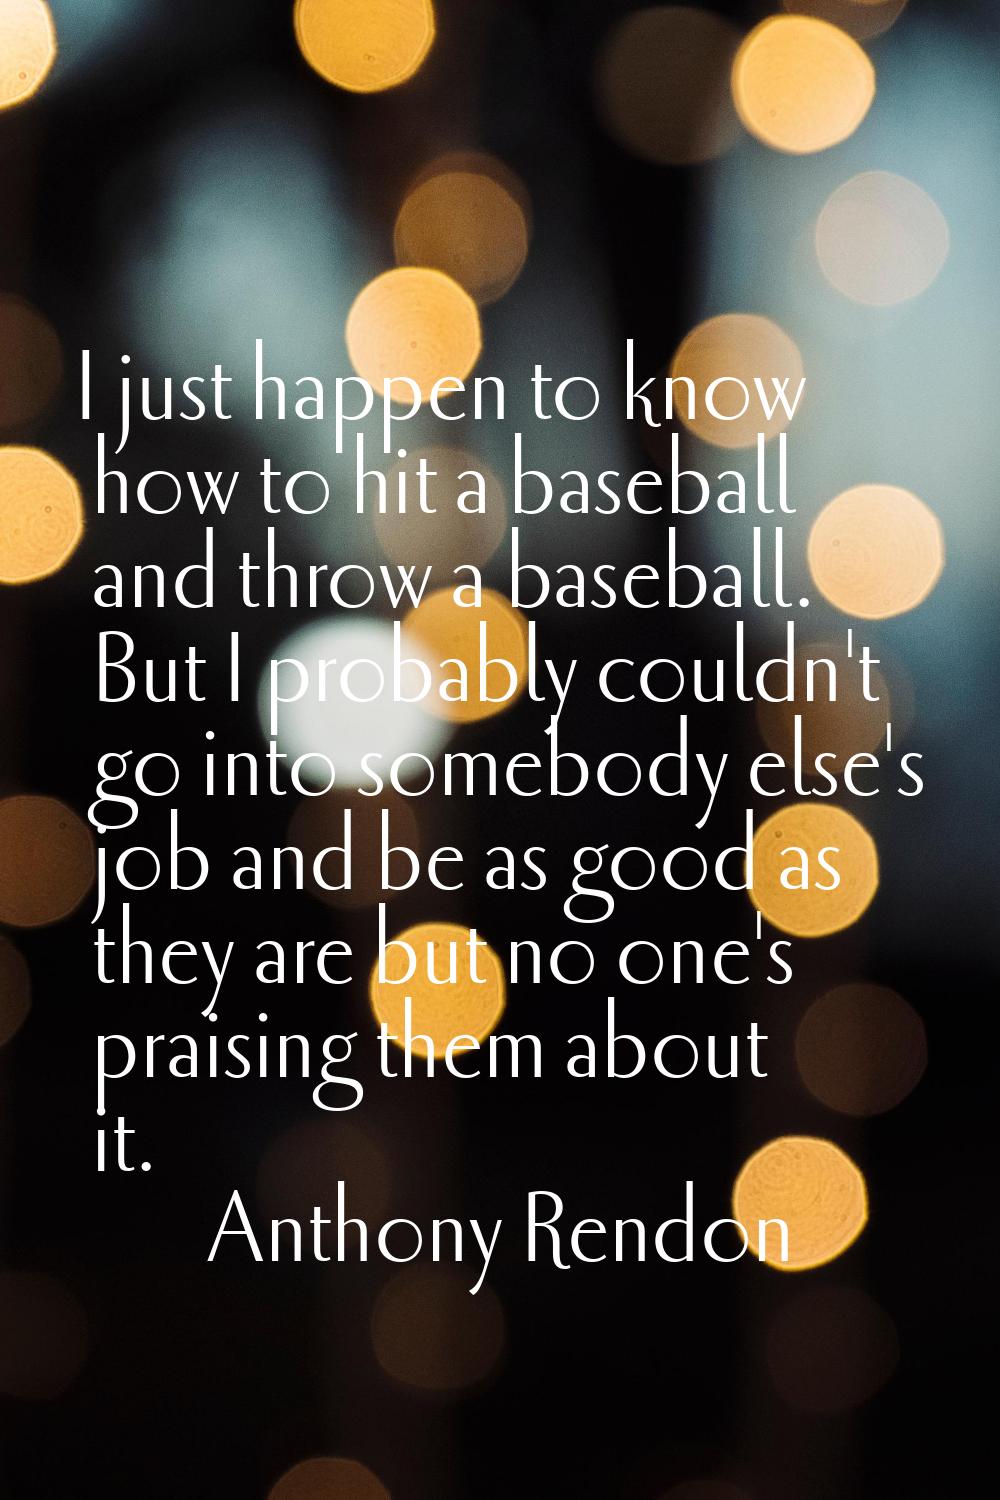 I just happen to know how to hit a baseball and throw a baseball. But I probably couldn't go into s